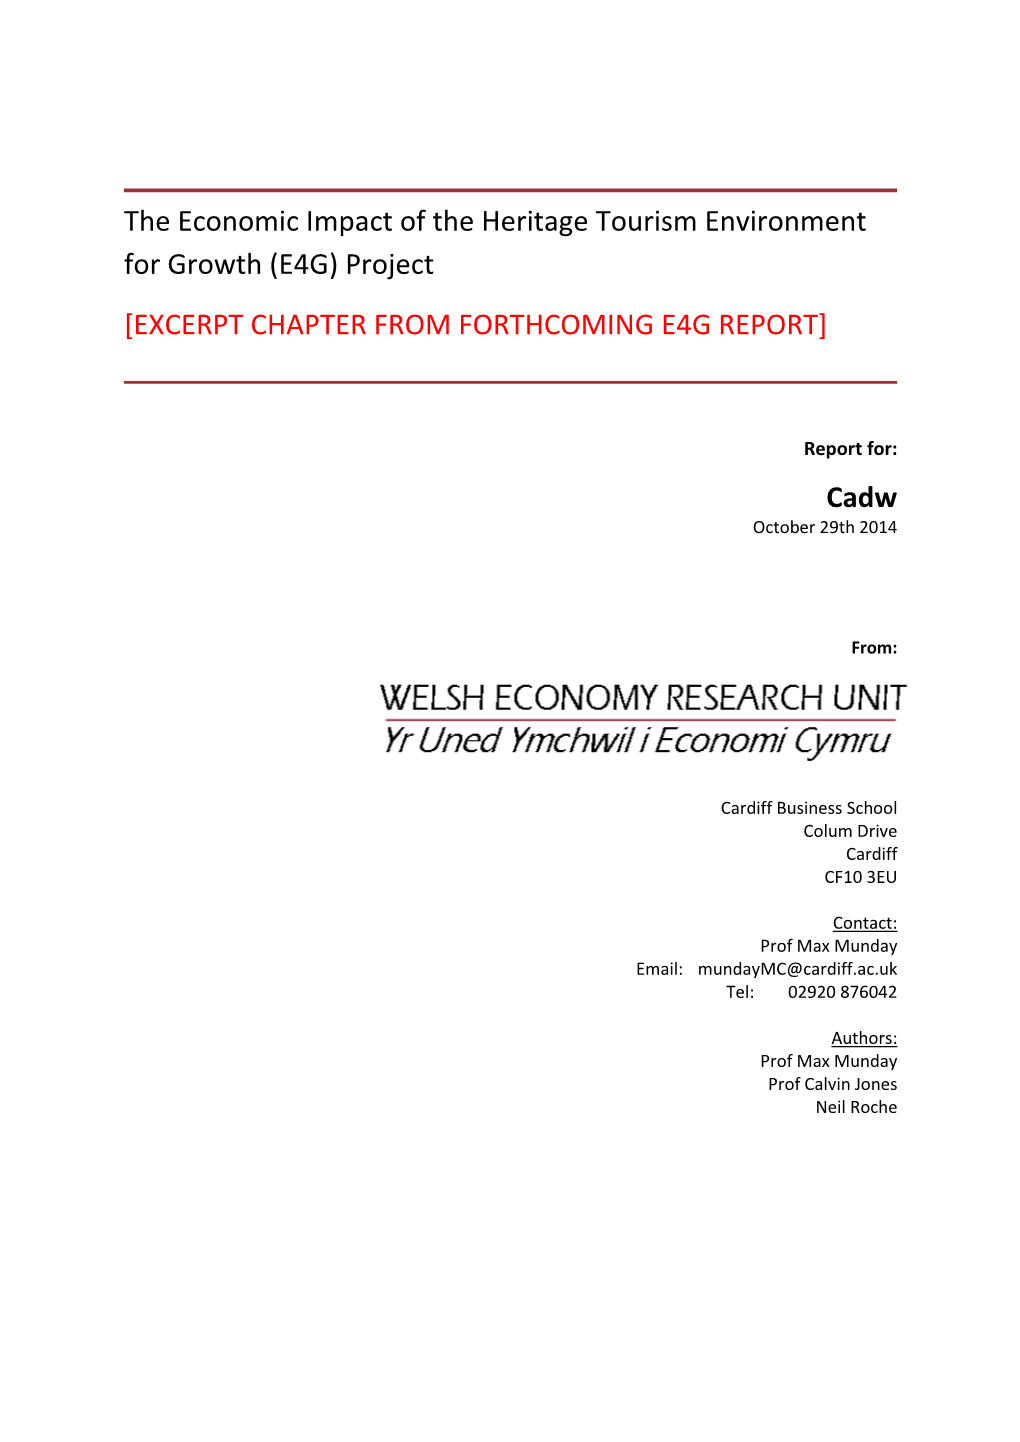 Heritage Tourism Project Economic Impact Chapter 30Oct14 Cardiff Business School V1